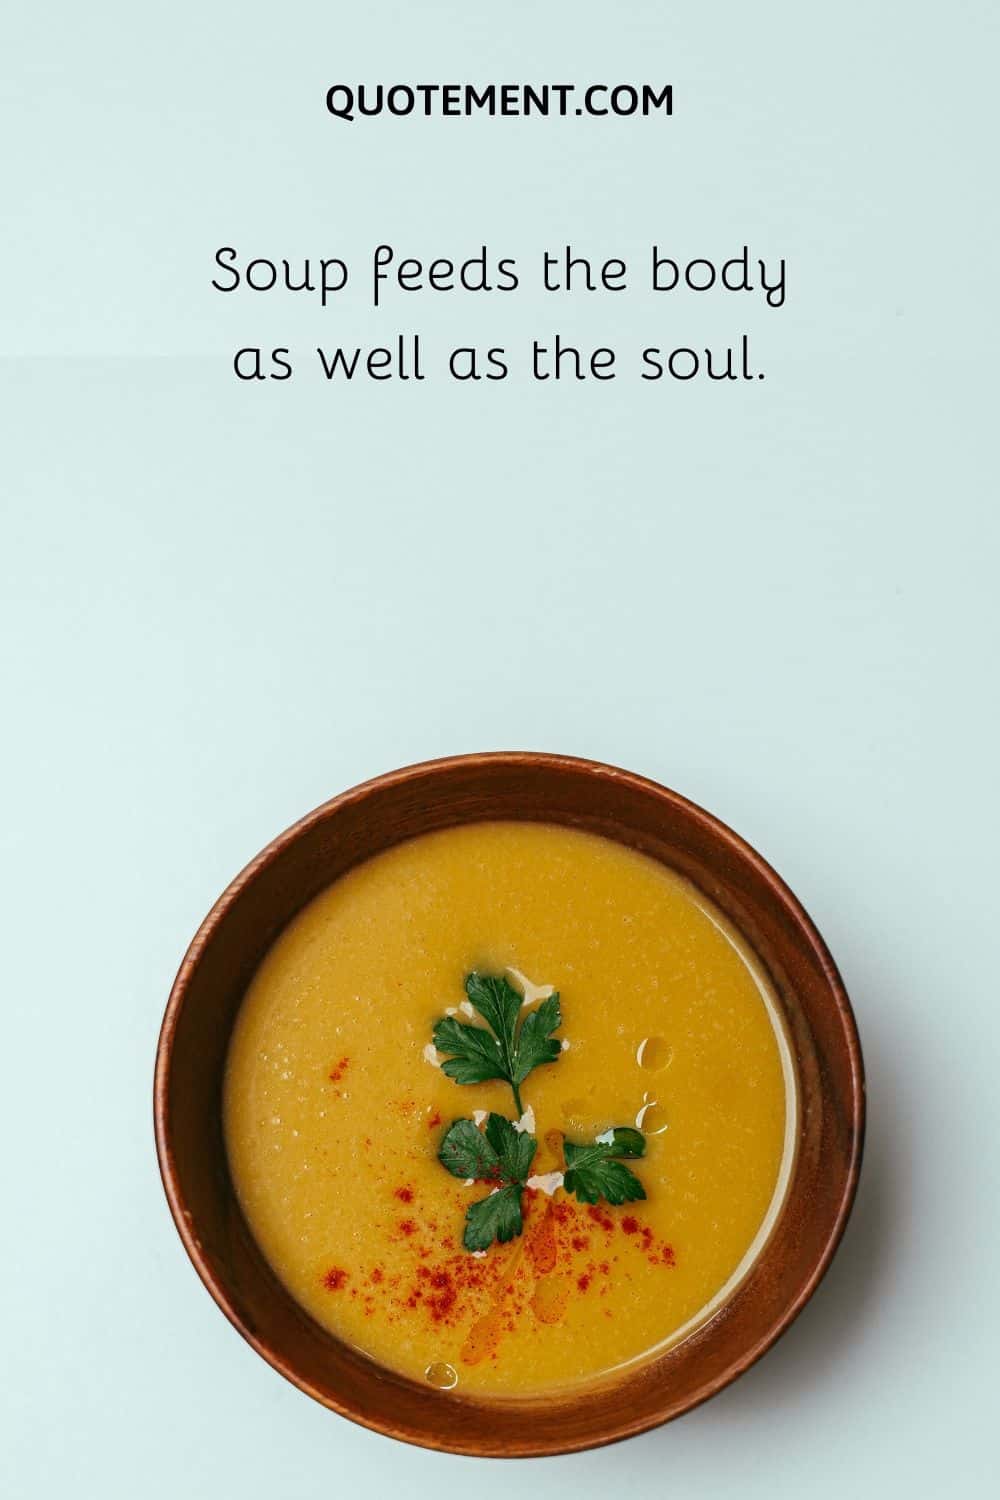 Soup feeds the body as well as the soul